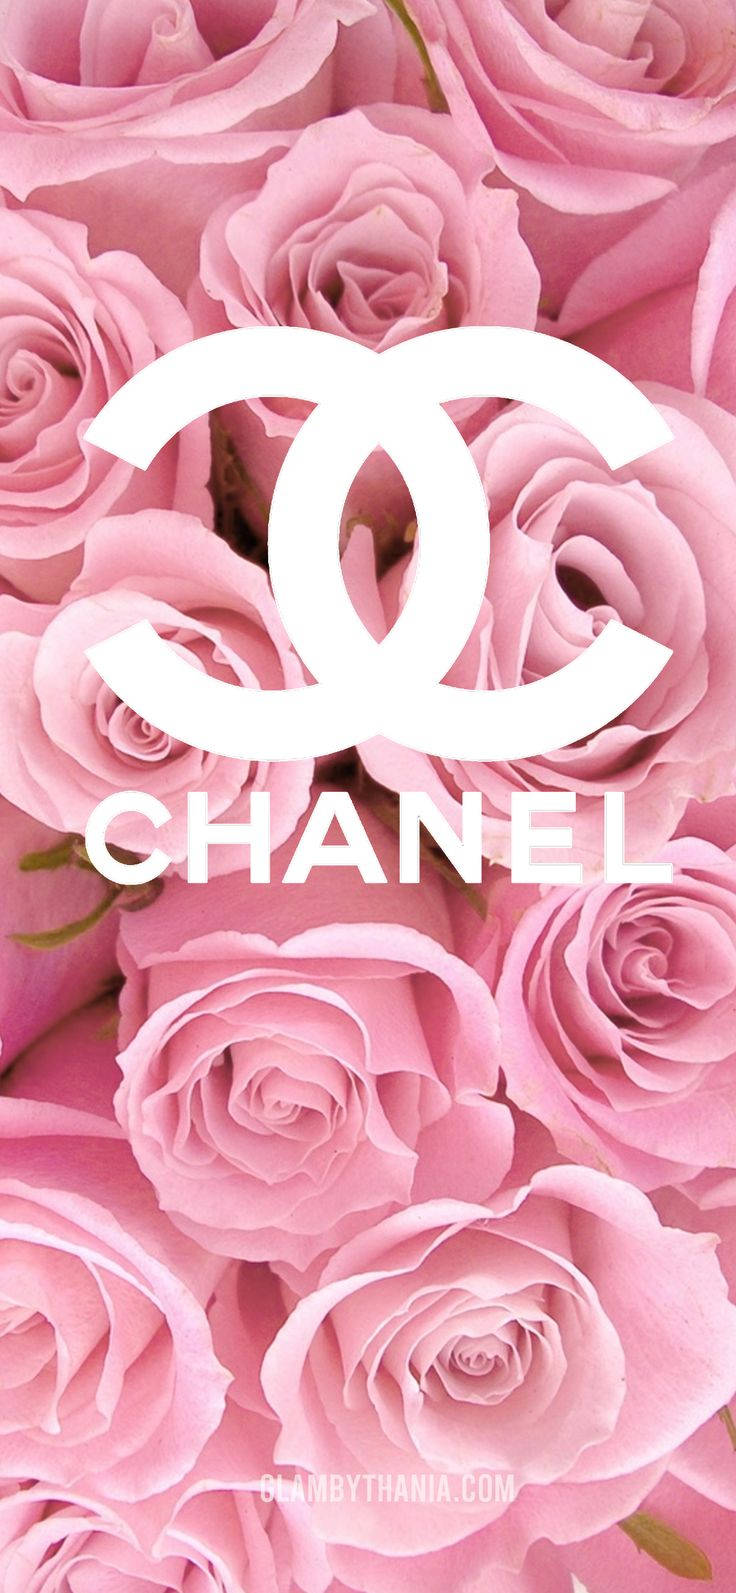 Chanel Roses Girly Iphone Wallpaper